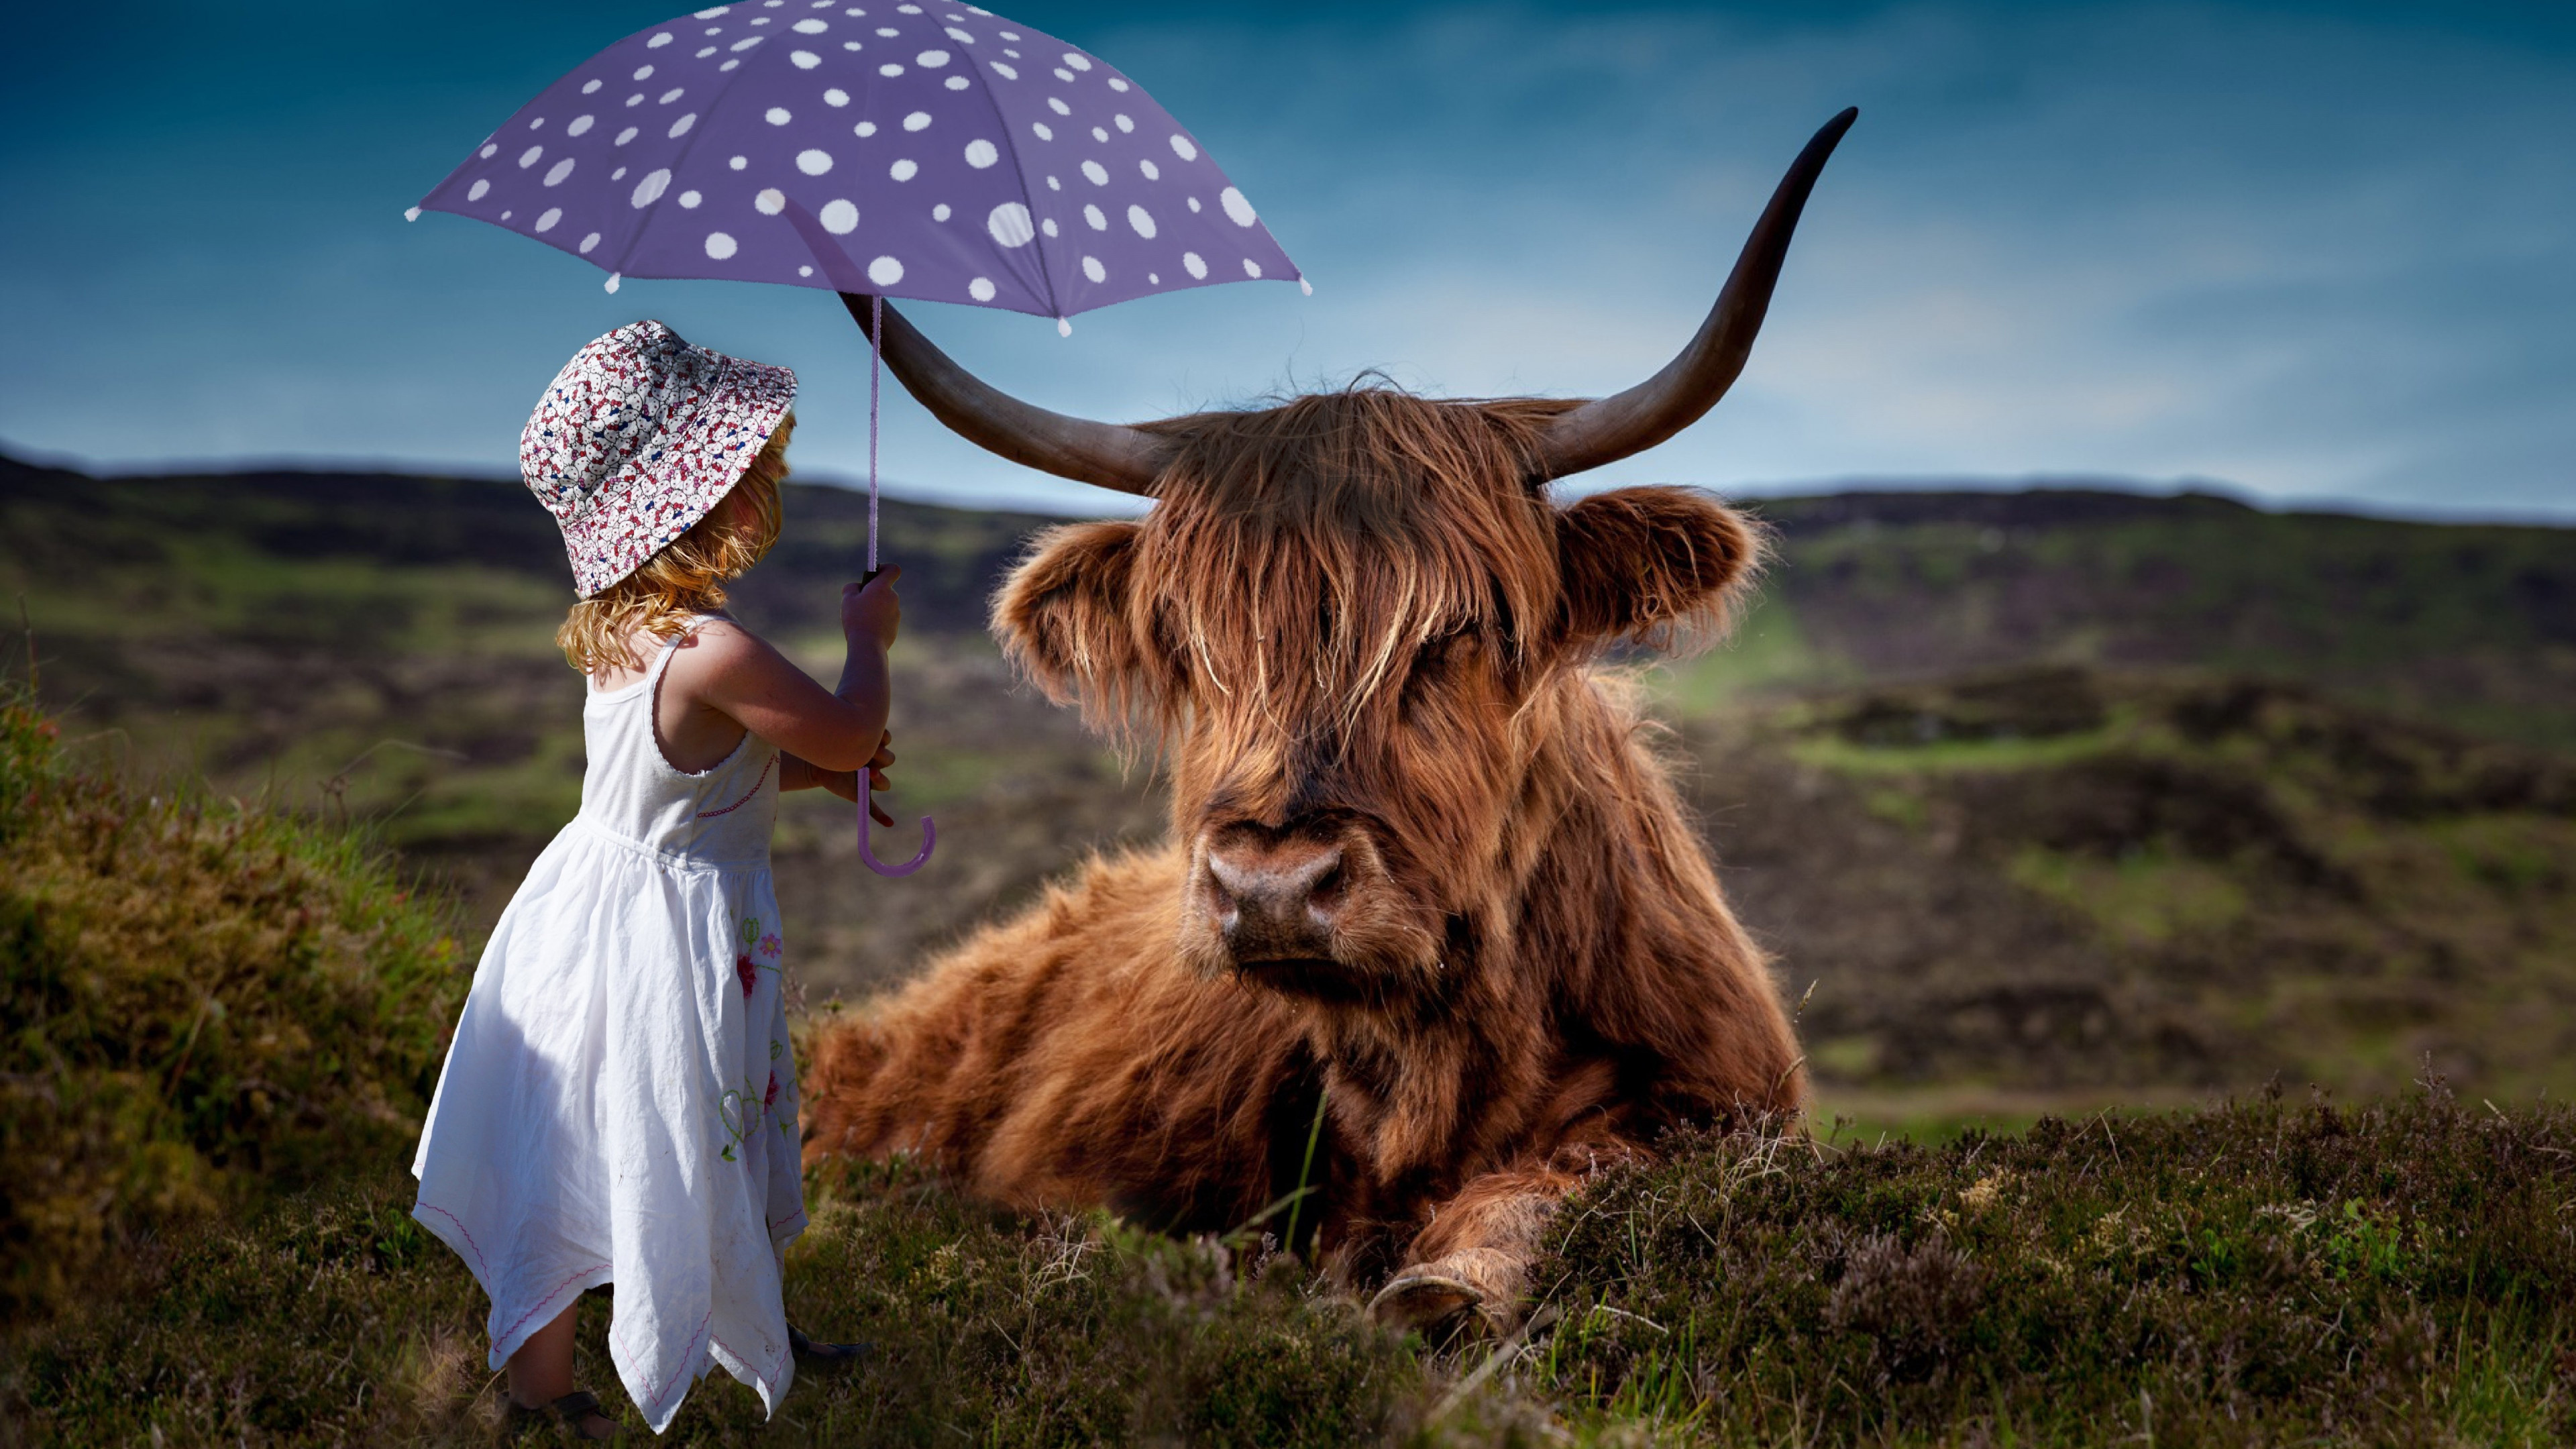 Child with the umbrella and the funny cow wallpaper 3840x2160